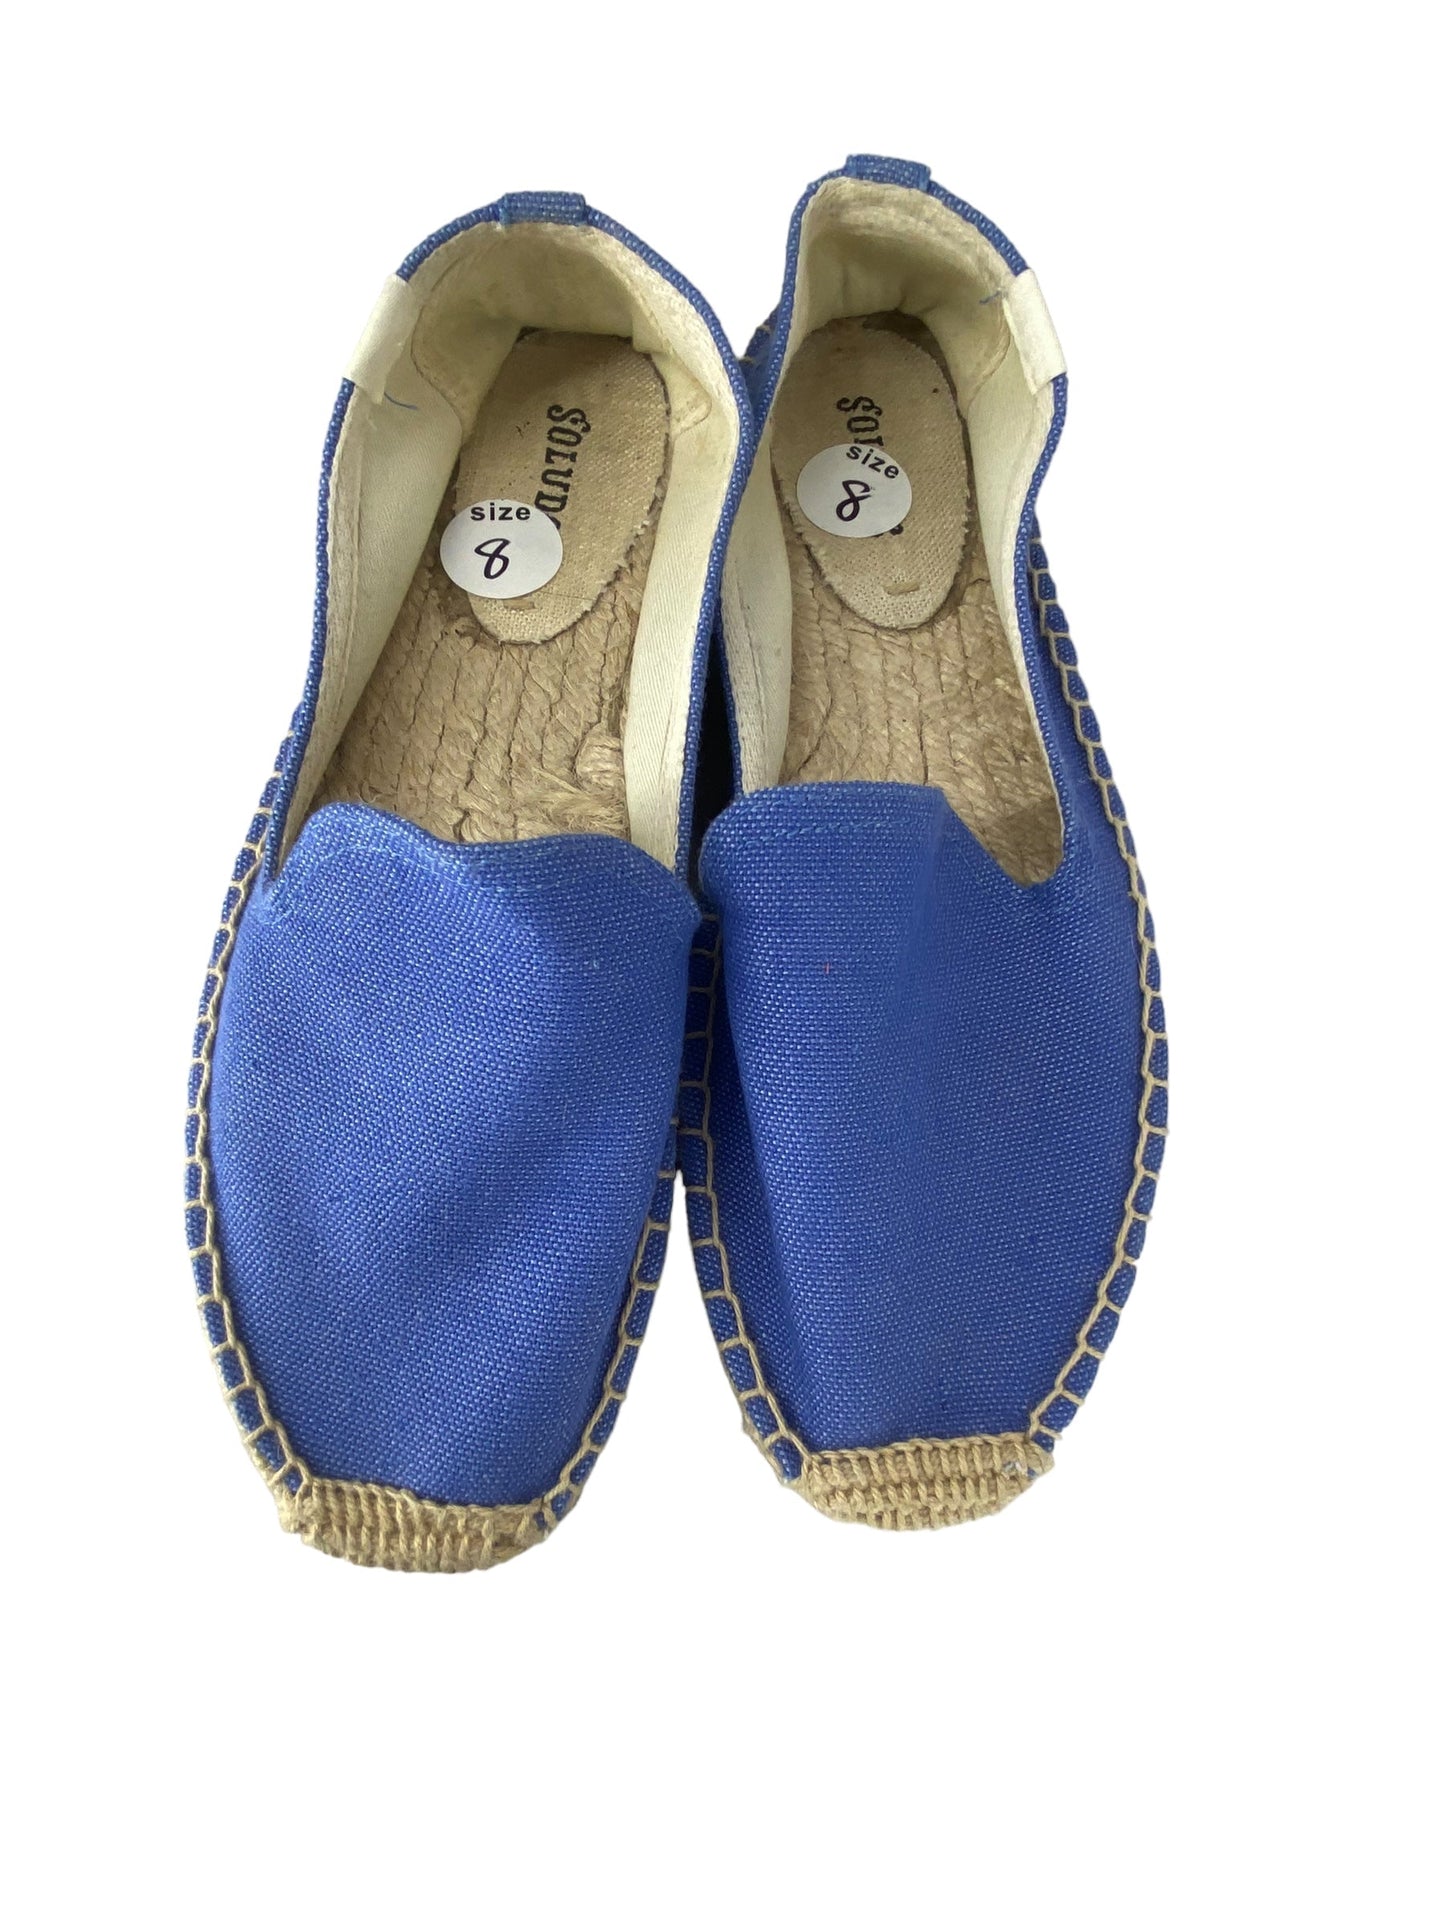 Blue Shoes Flats Soludos, Size 8